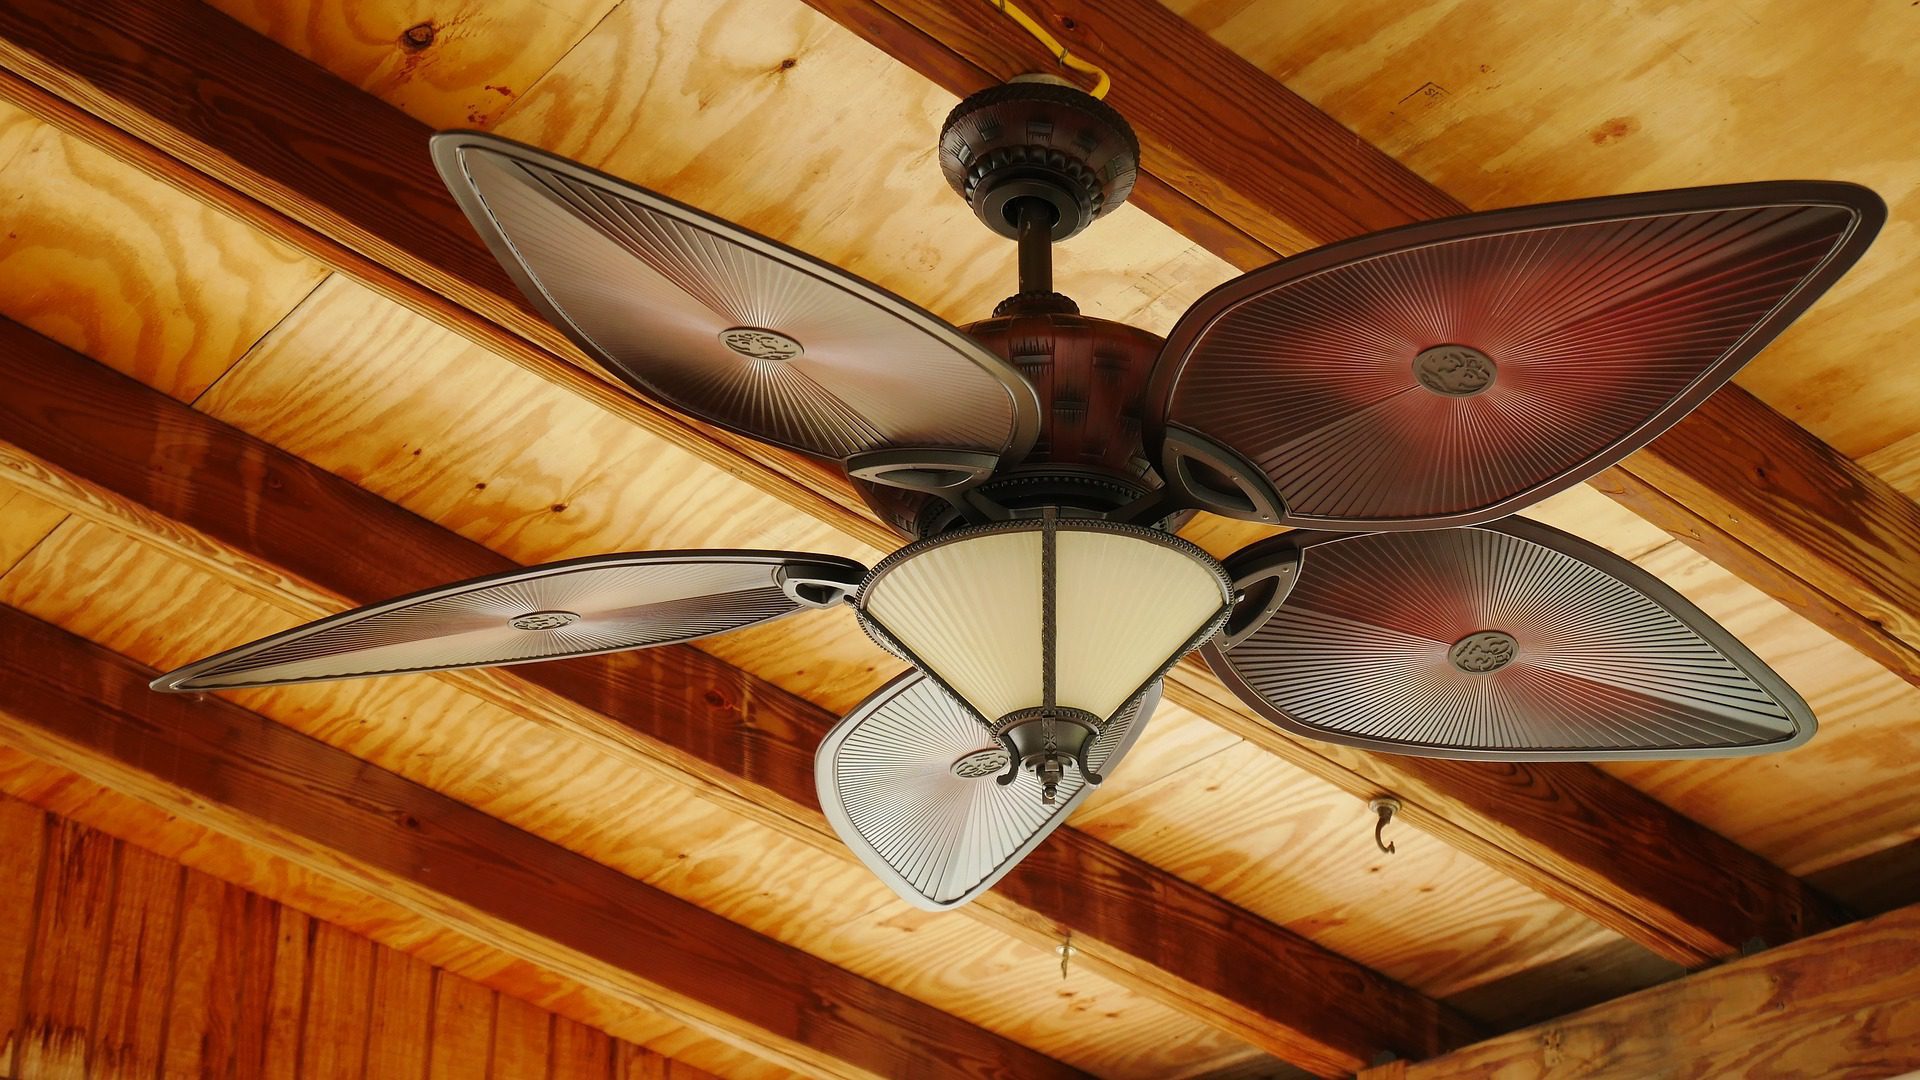 You are currently viewing Airbnb Hosting: How to Clean Ceiling Fans for Guest Stays